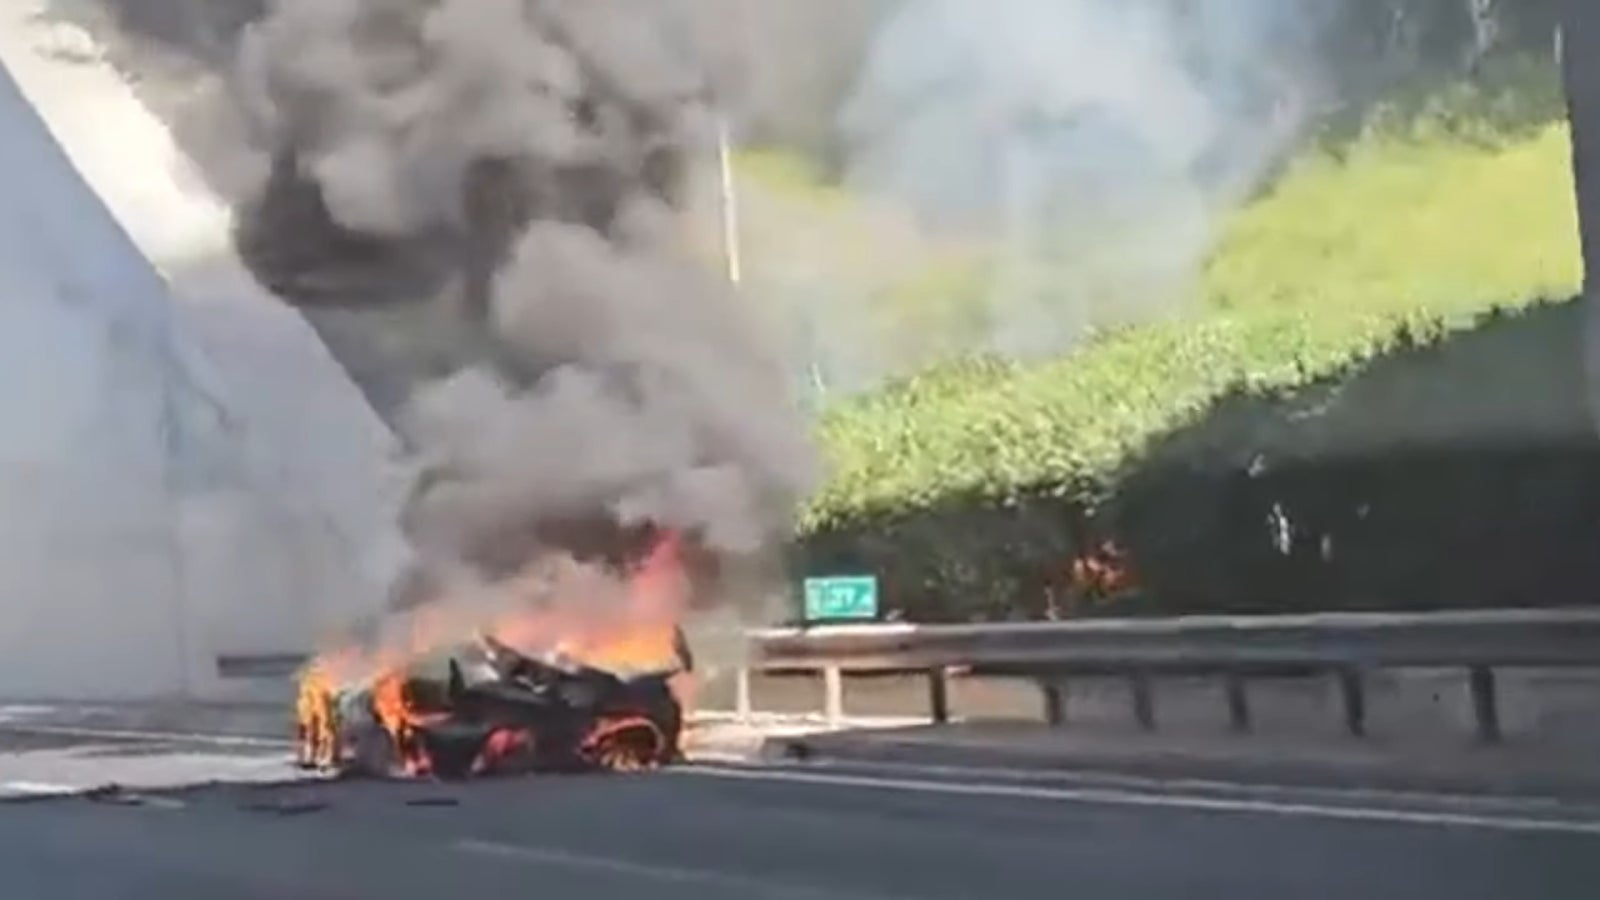 A screenshot showing a car on fire on the side of the road. 